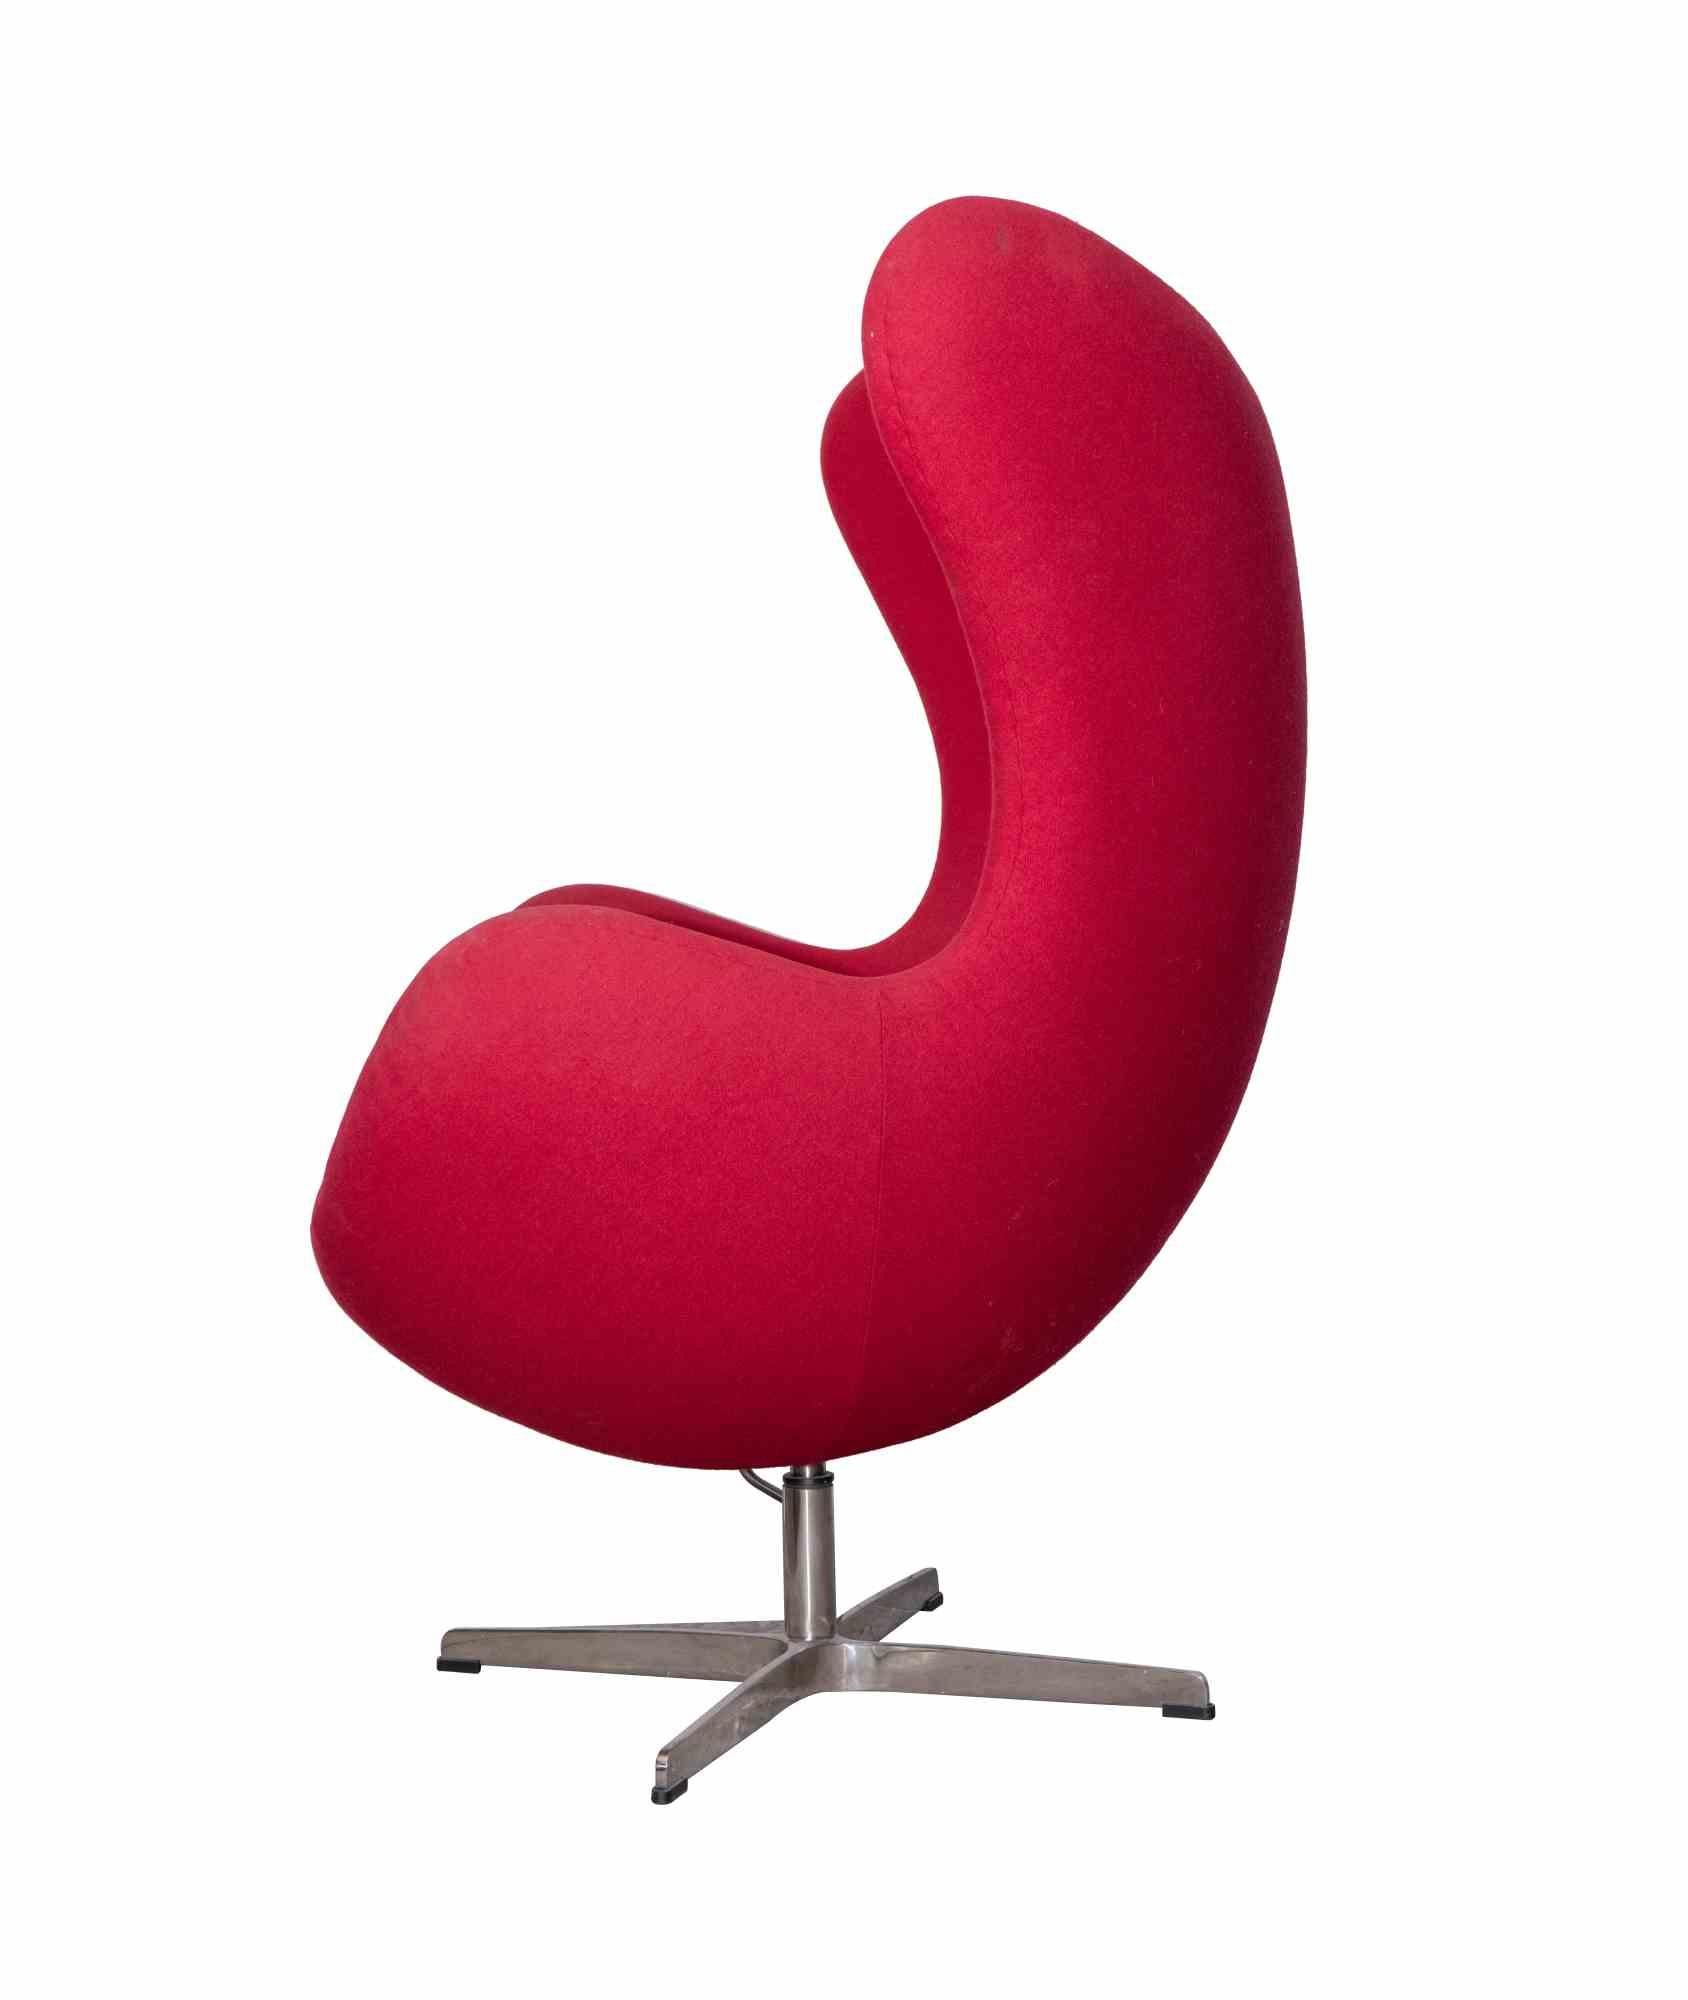 Vintage egg chair is an original design furniture item attr. to Arne Jacobsen and realized for Fritz Hansen&Sons.

Aluminum base on a steel pedestal, shell in polyurethane foam with fiberglass. Upholstery in red fabric.

Designed first in 1959,